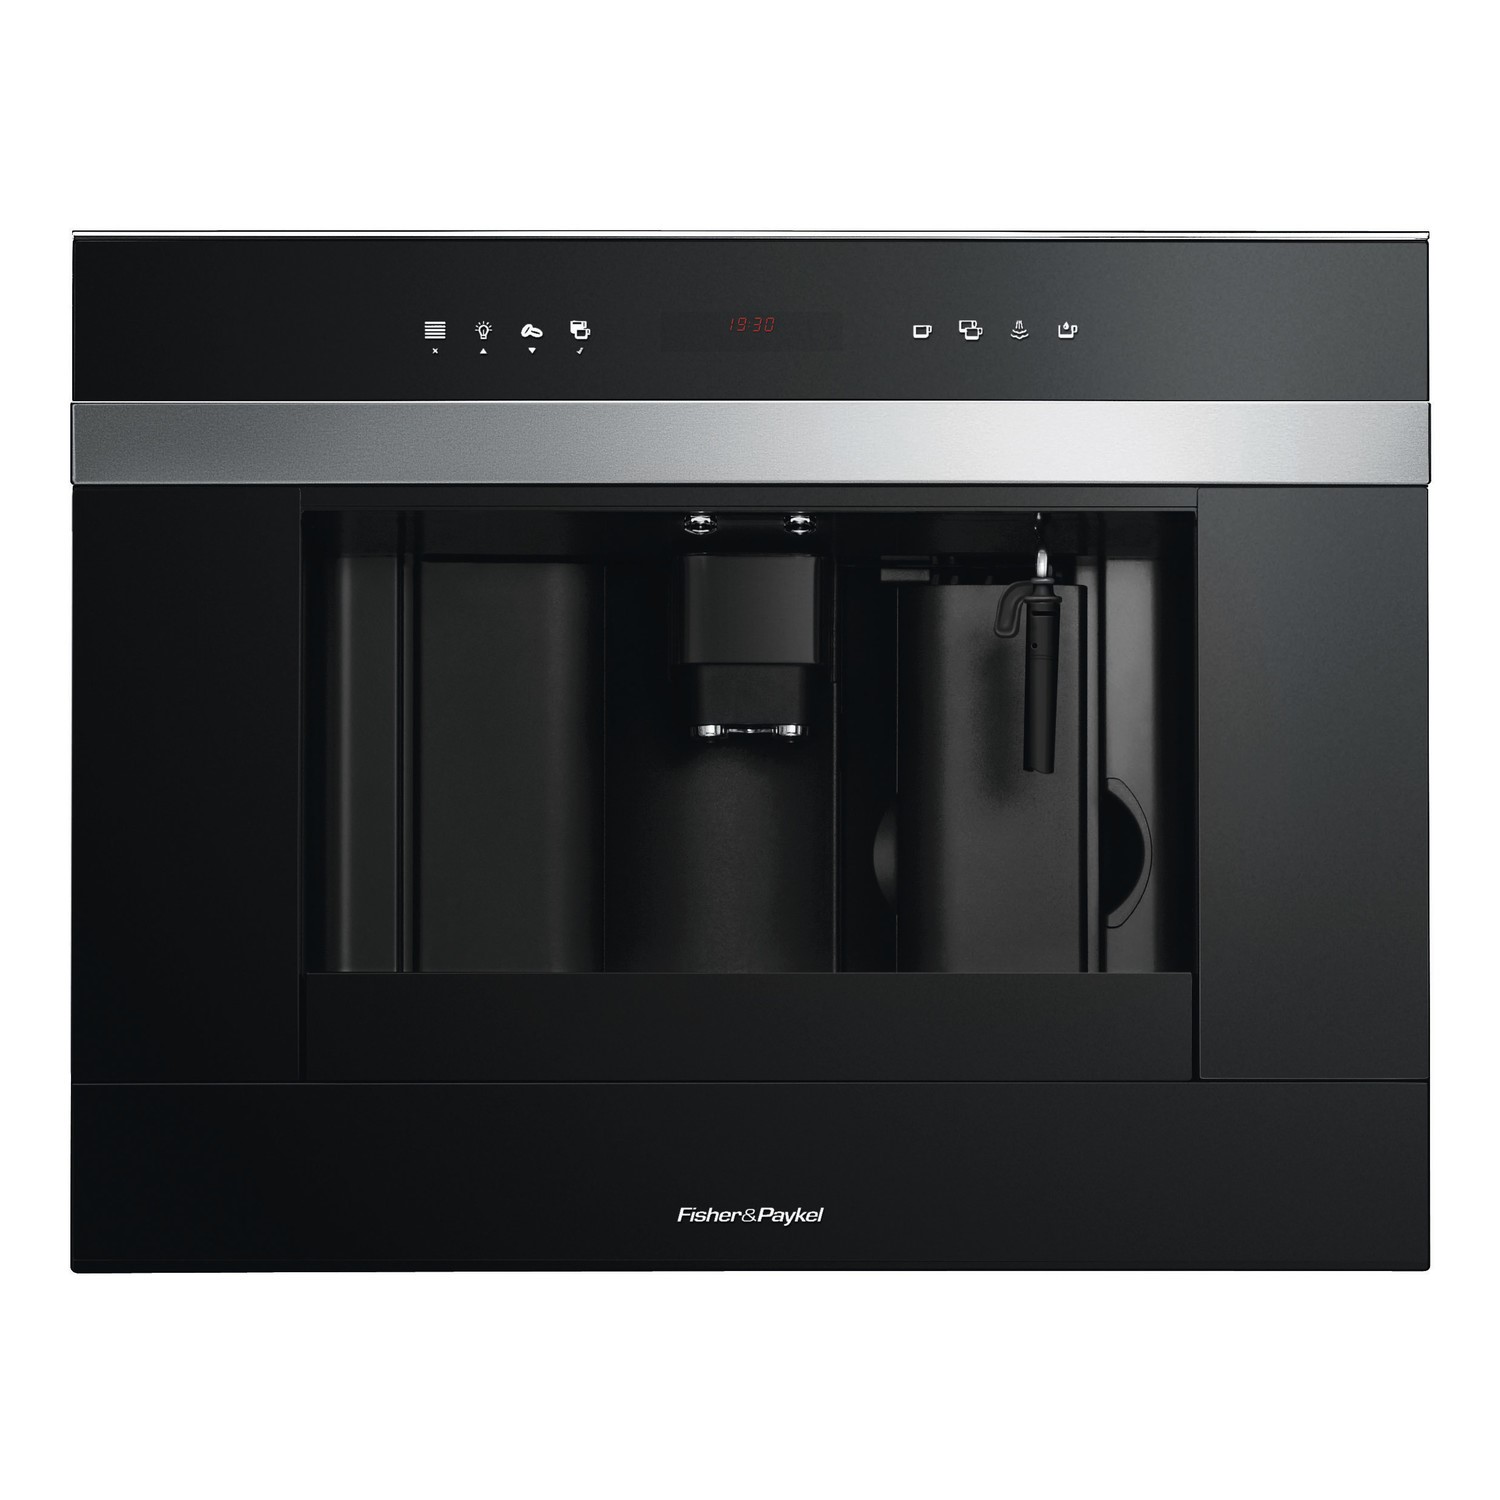 Fisher & Paykel Series 9 Built-in Bean-To-Cup Coffee Centre - Black Glass & Stainless Steel